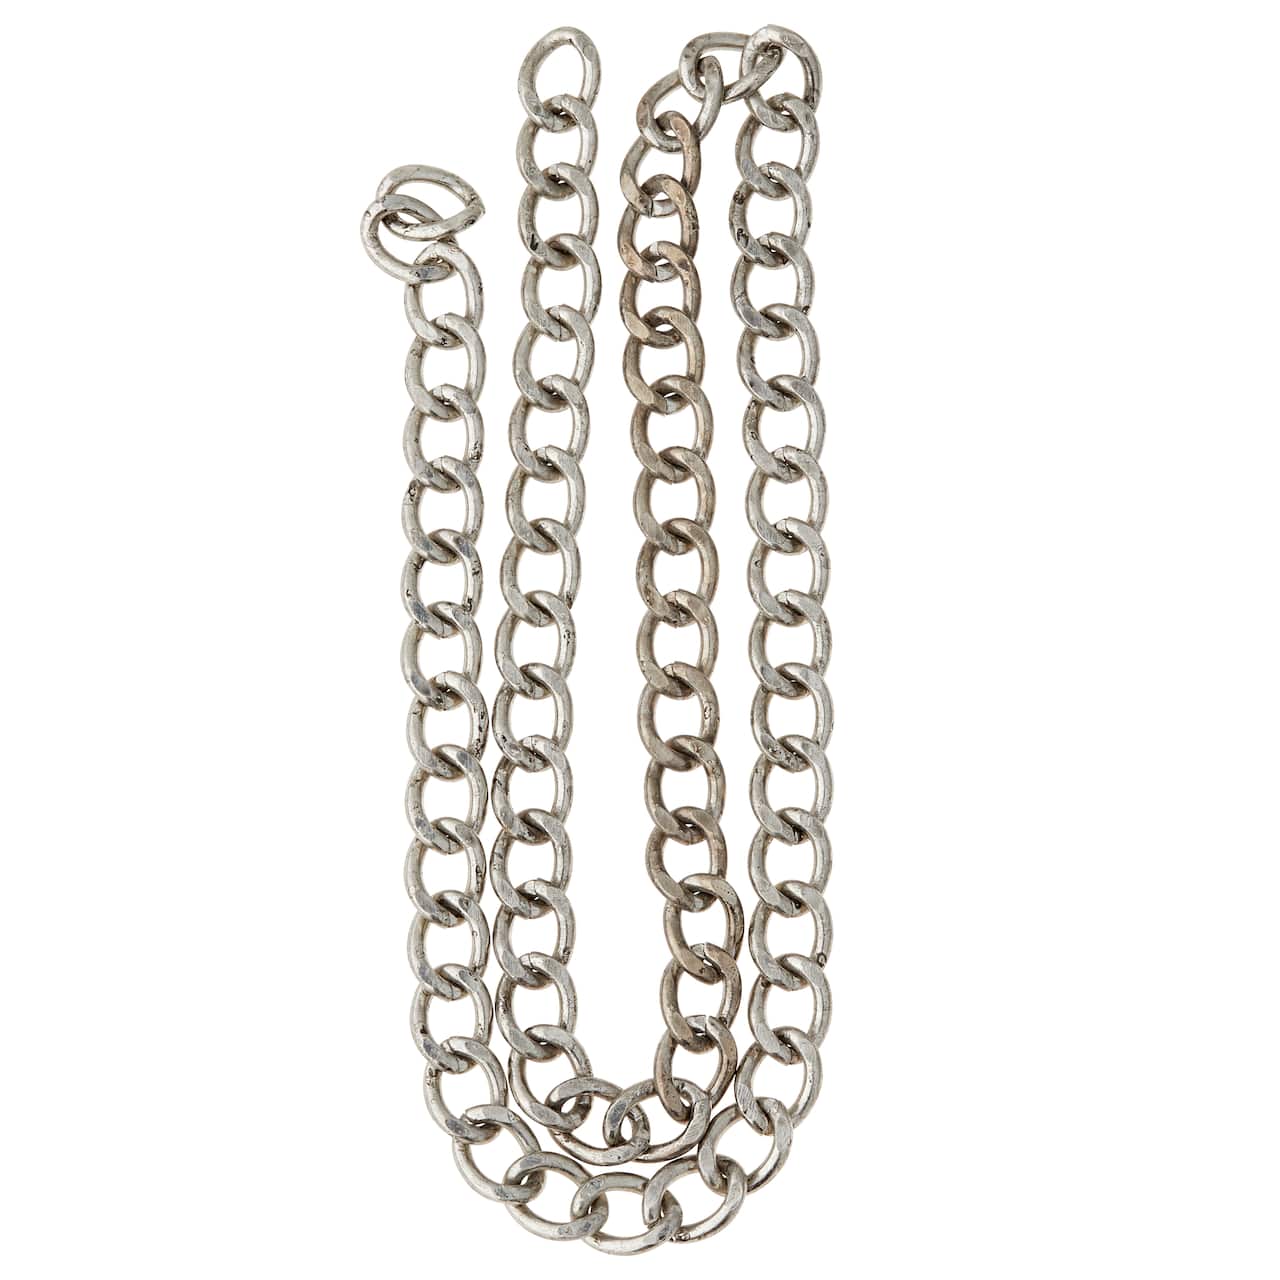 Bead Landing&#x2122; Antique Silver Twisted Chain, 24&#x22;